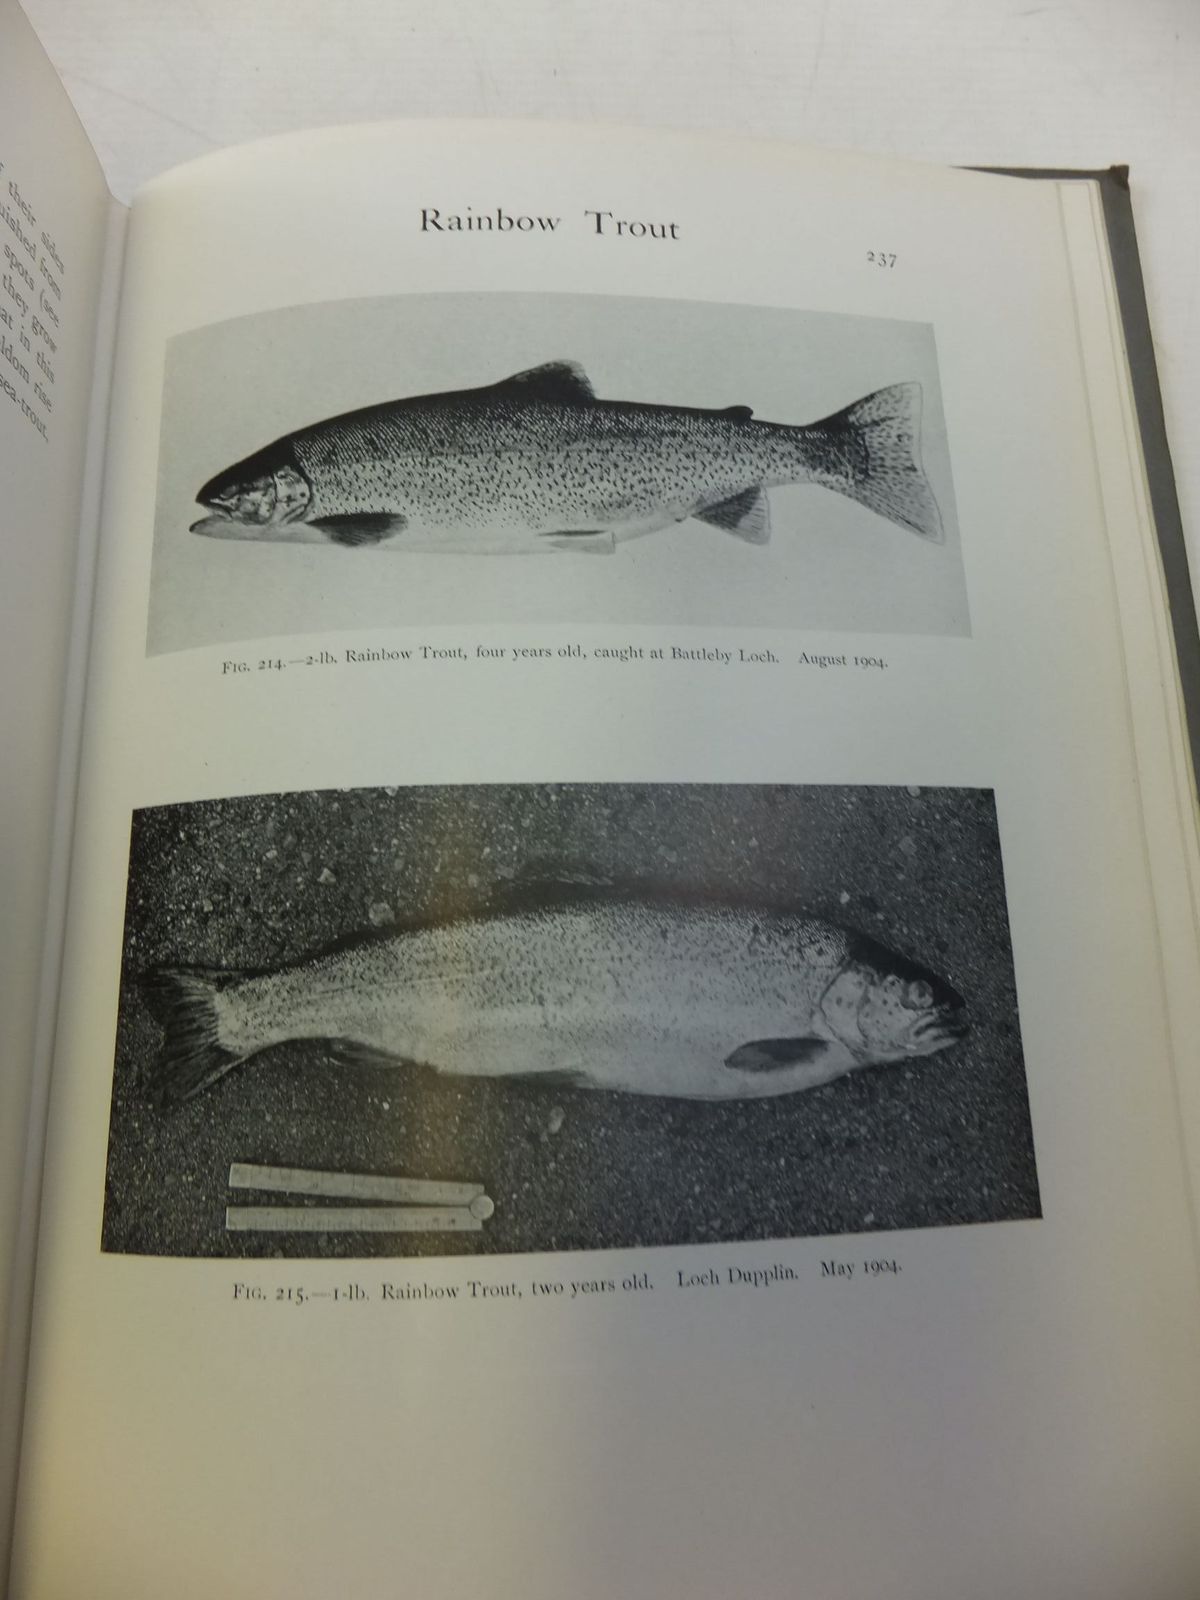 Photo of LIFE HISTORY AND HABITS OF THE SALMON, SEA-TROUT, TROUT AND OTHER FRESHWATER FISH written by Malloch, P.D. published by Adam & Charles Black (STOCK CODE: 2112420)  for sale by Stella & Rose's Books